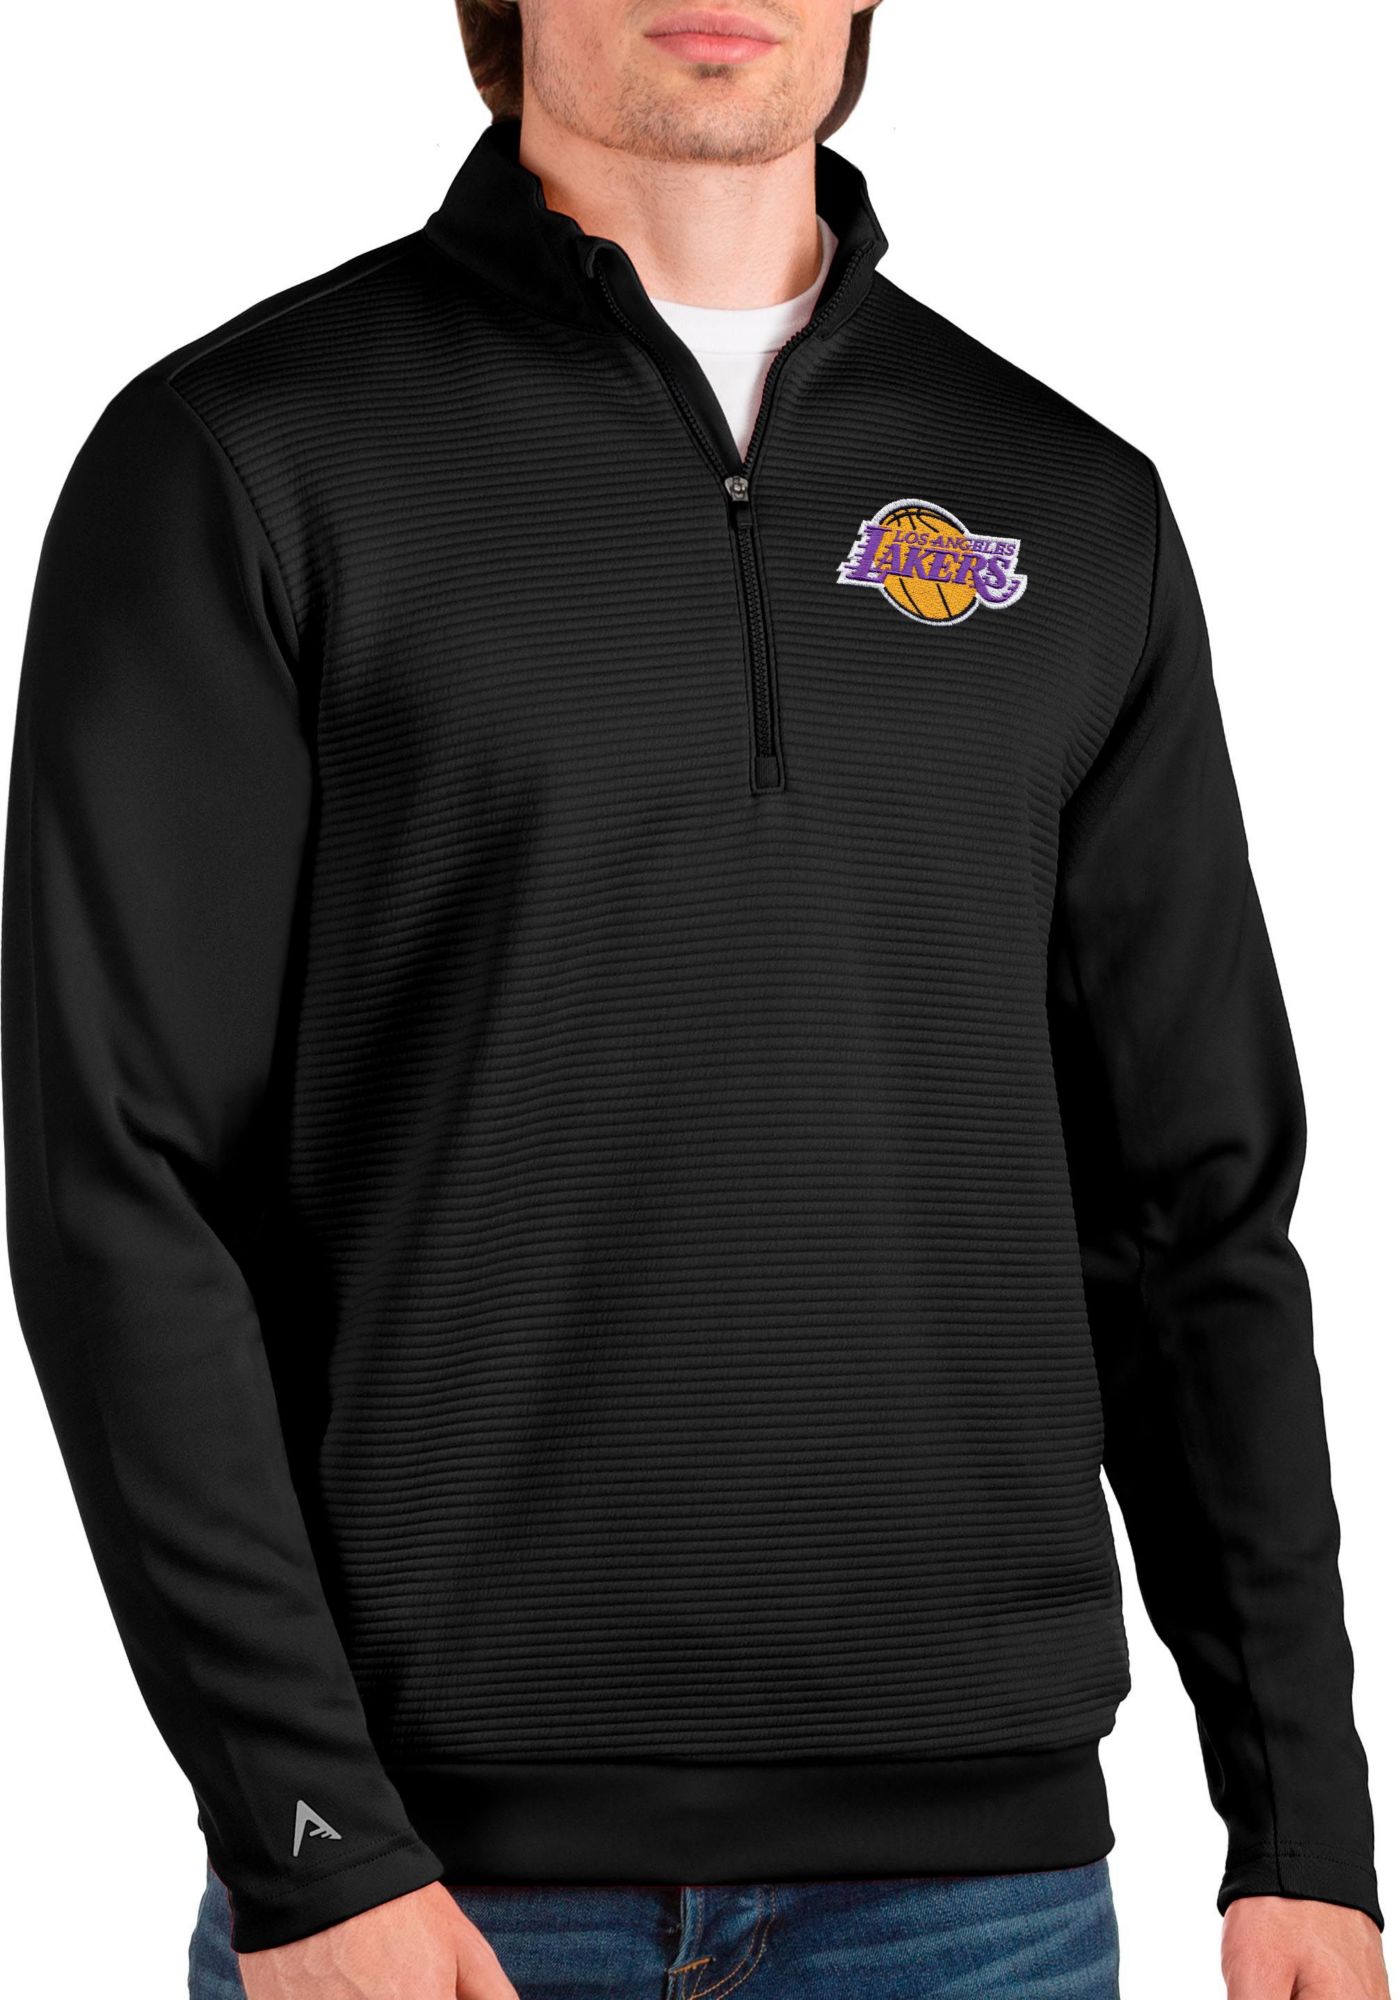 Los Angeles Lakers Women's Apparel  Curbside Pickup Available at DICK'S